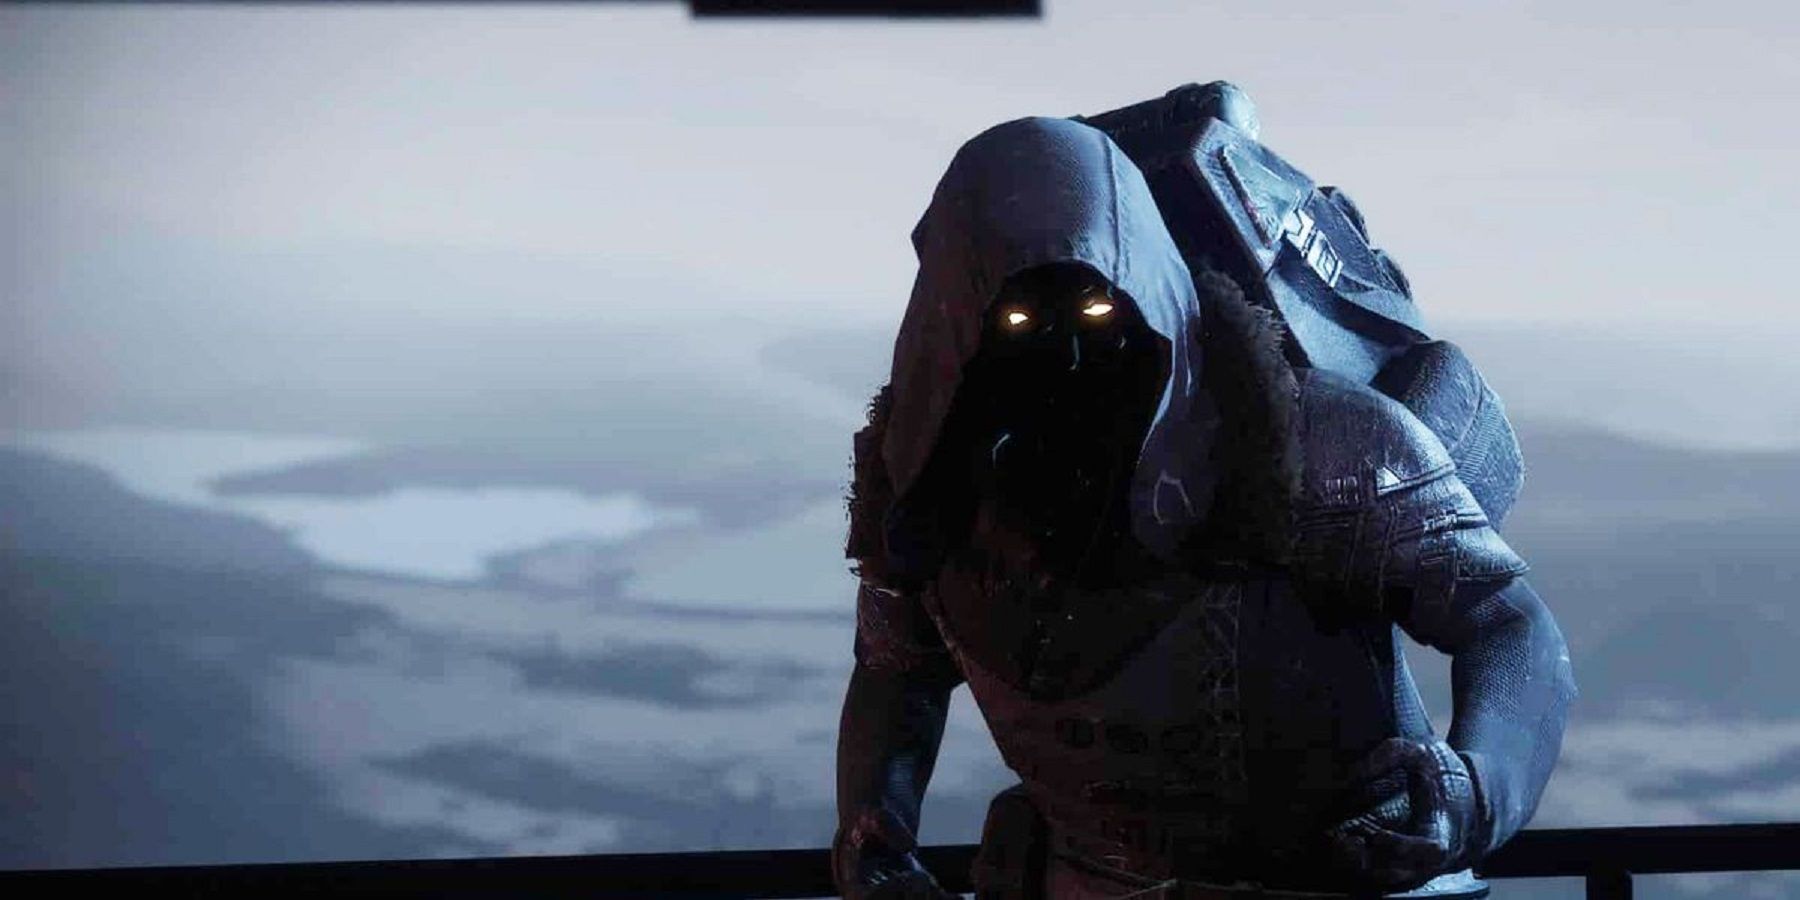 A Destiny 2 player suggests adding old shaders to Xur's loot pool.